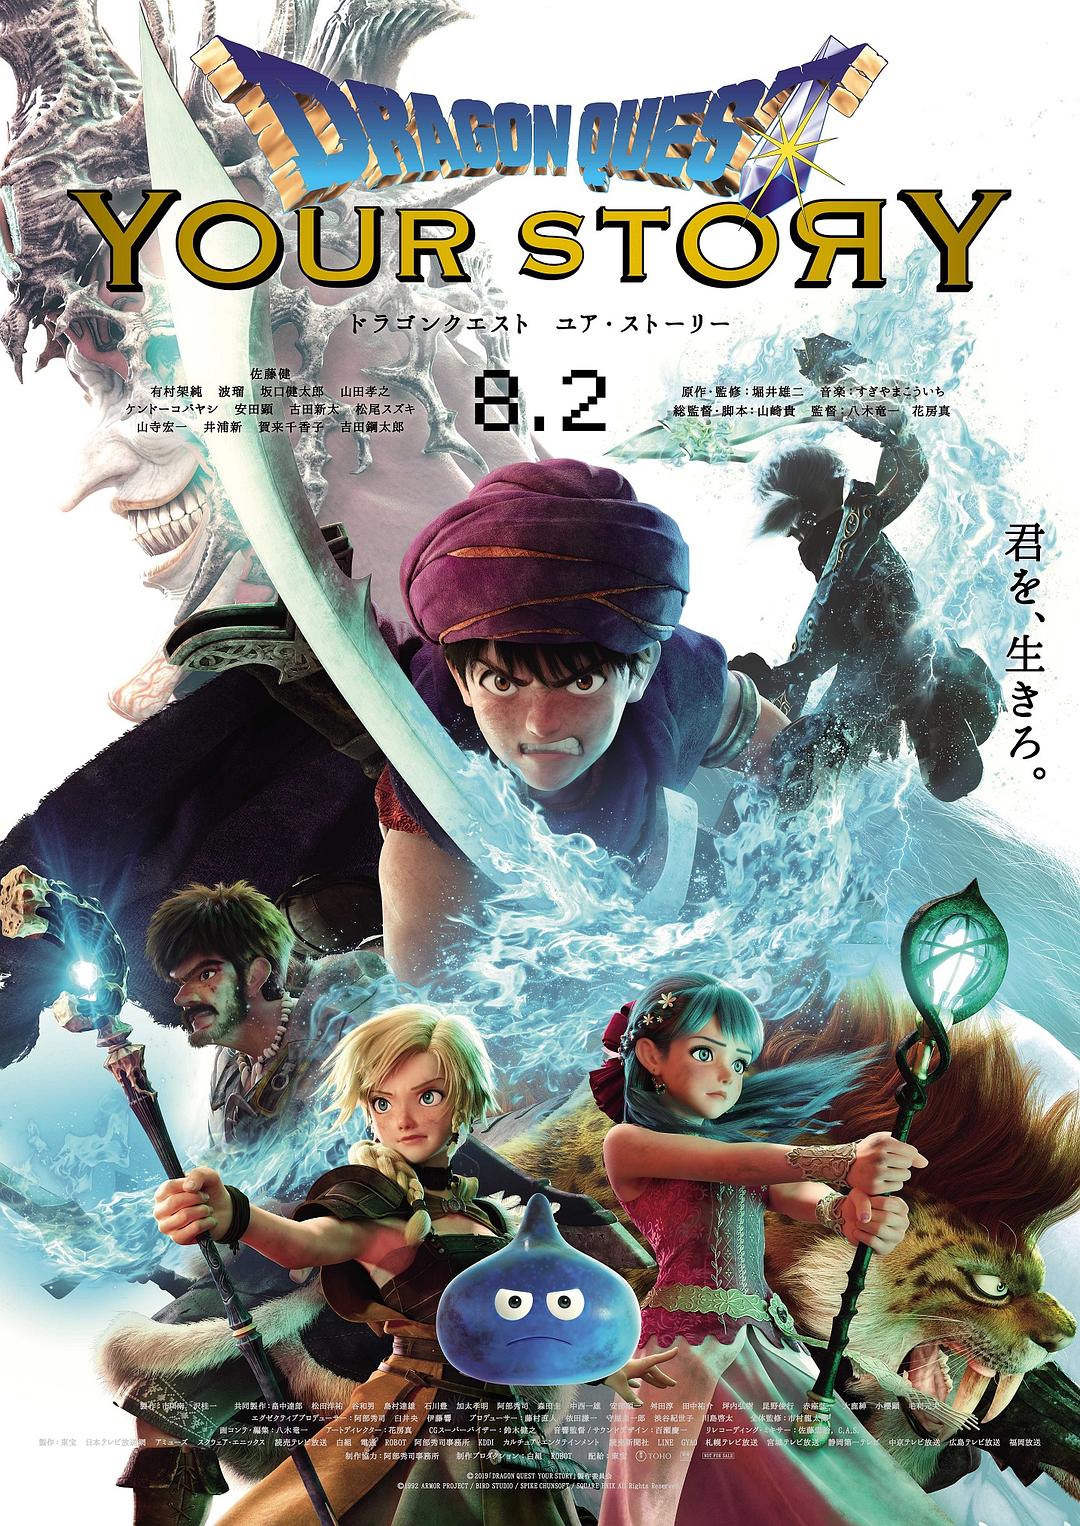 ߶ Ĺ Dragon.Quest.Your.Story.2019.JAPANESE.1080p.BluRay.x264.DD5.1-PTer 12-1.jpeg